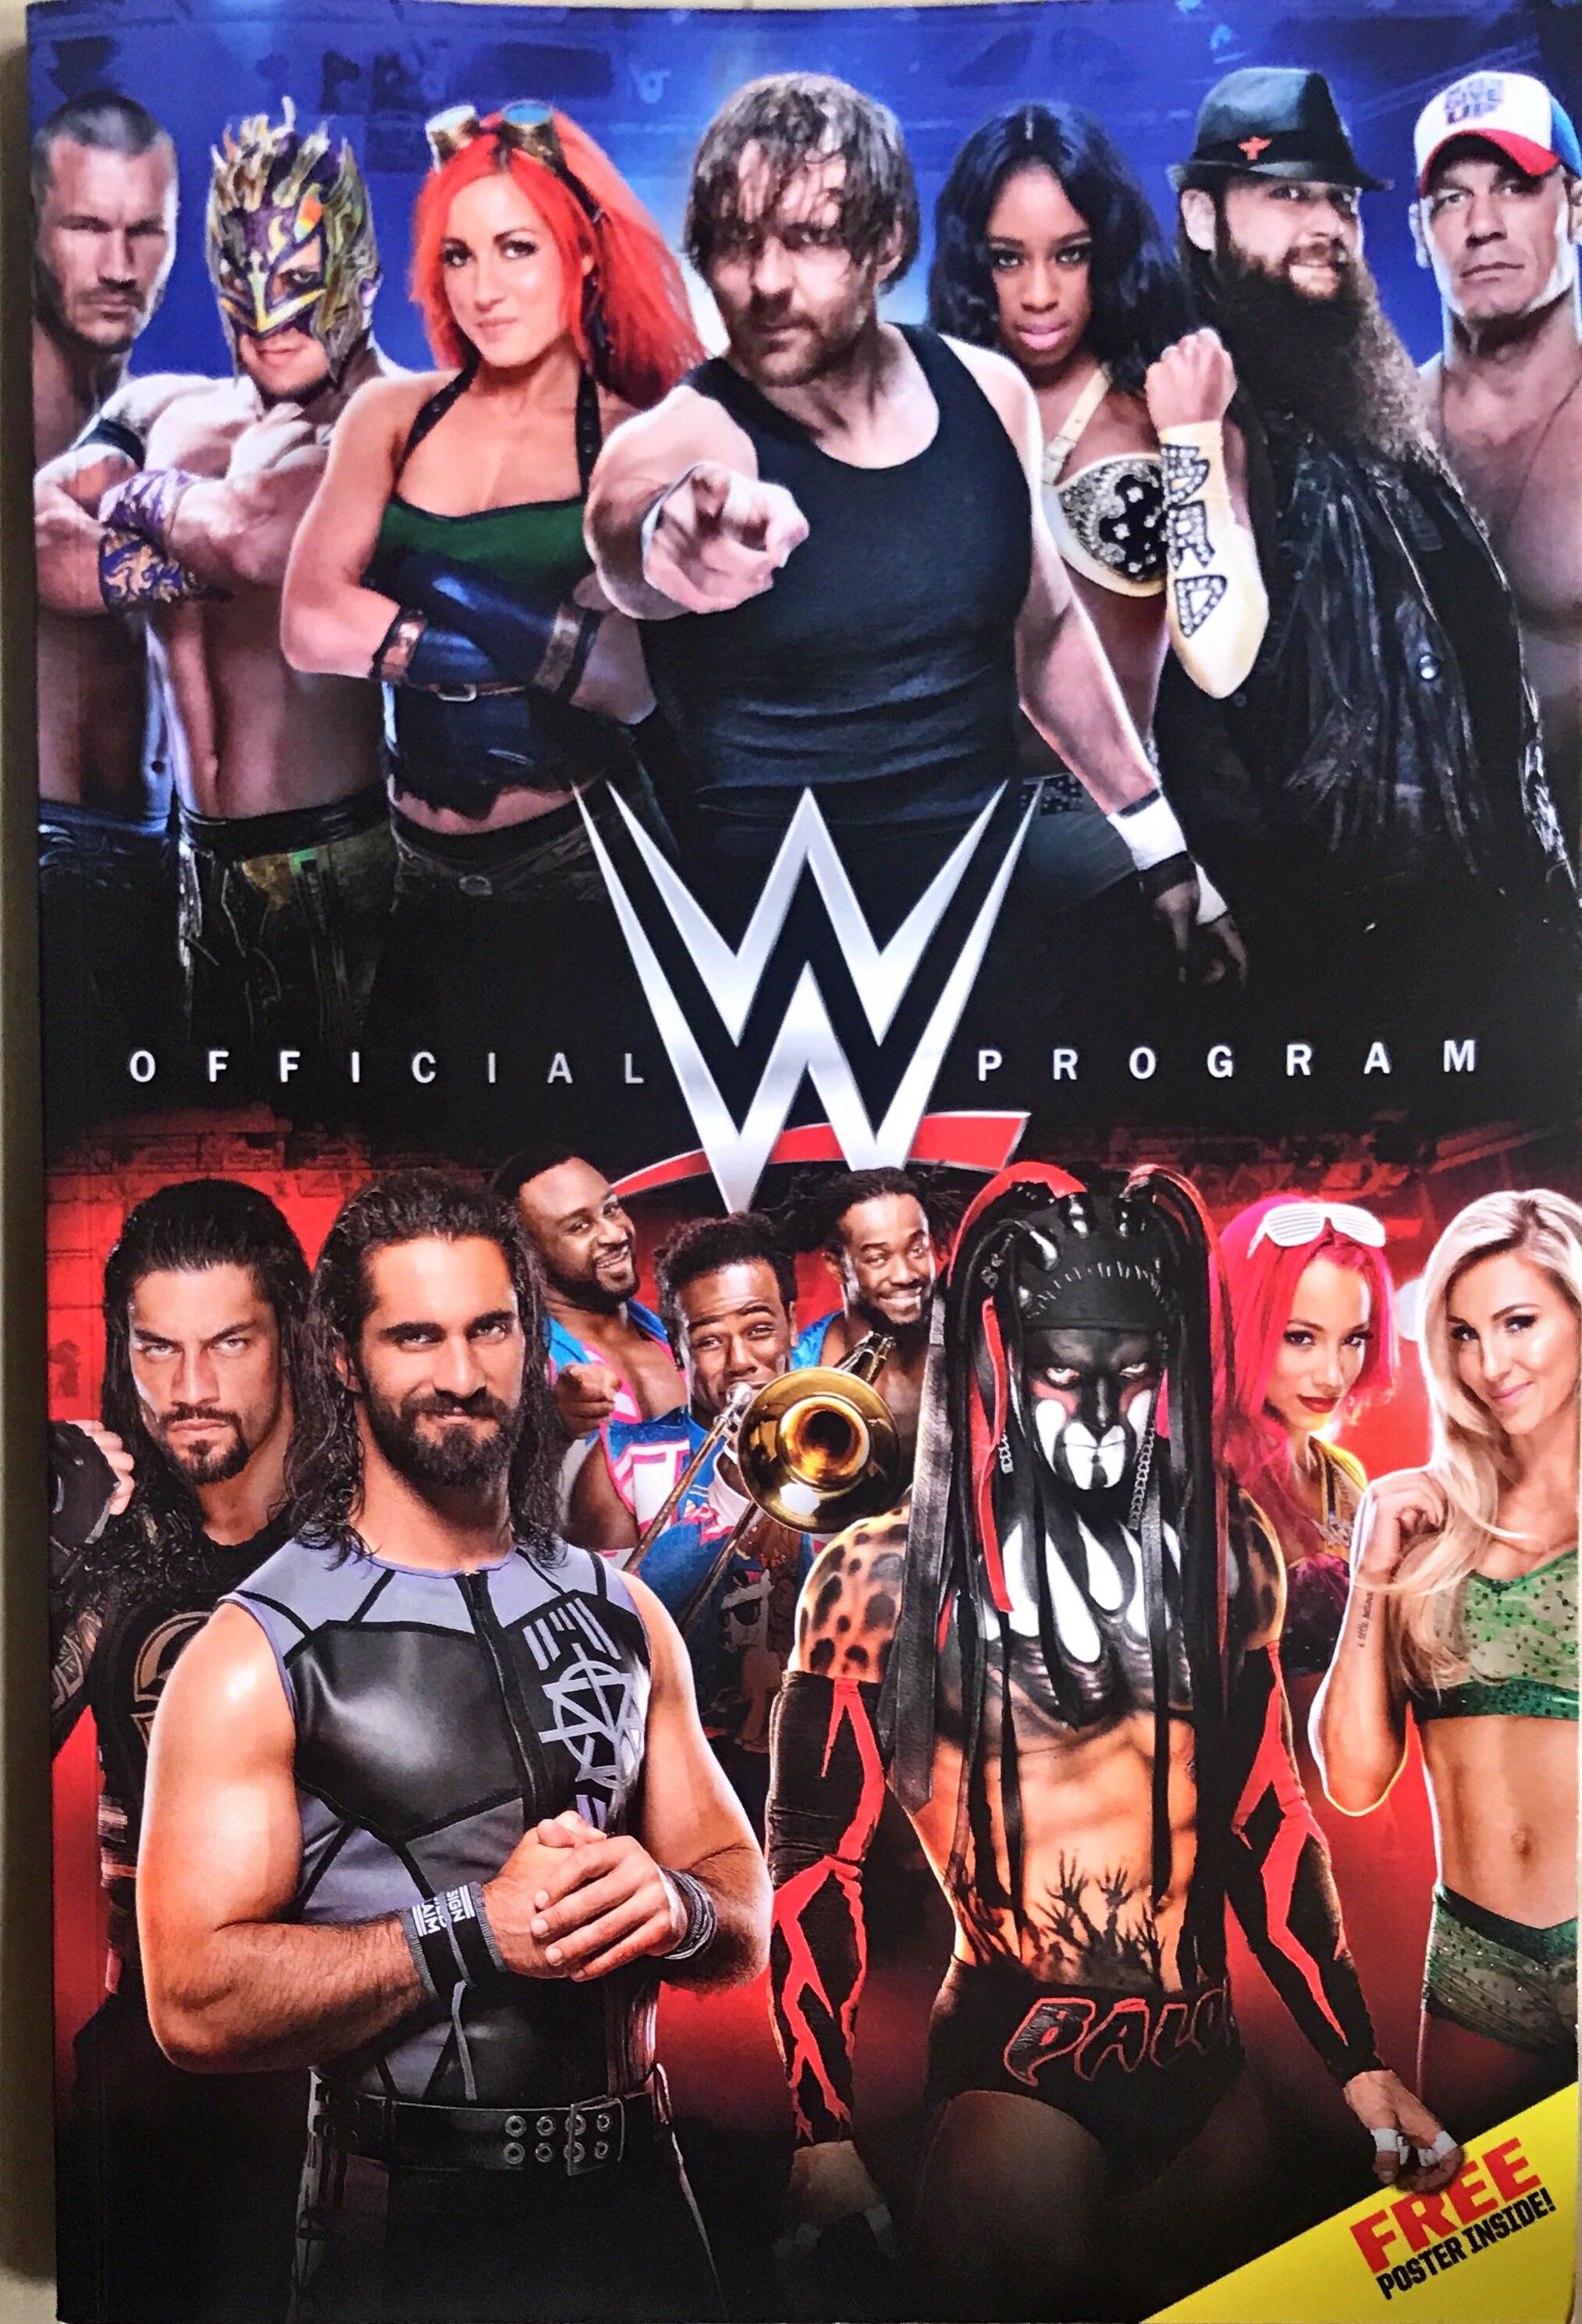 WWE OFFICIAL PROGRAM booklet, Hobbies & Toys, Books & Magazines